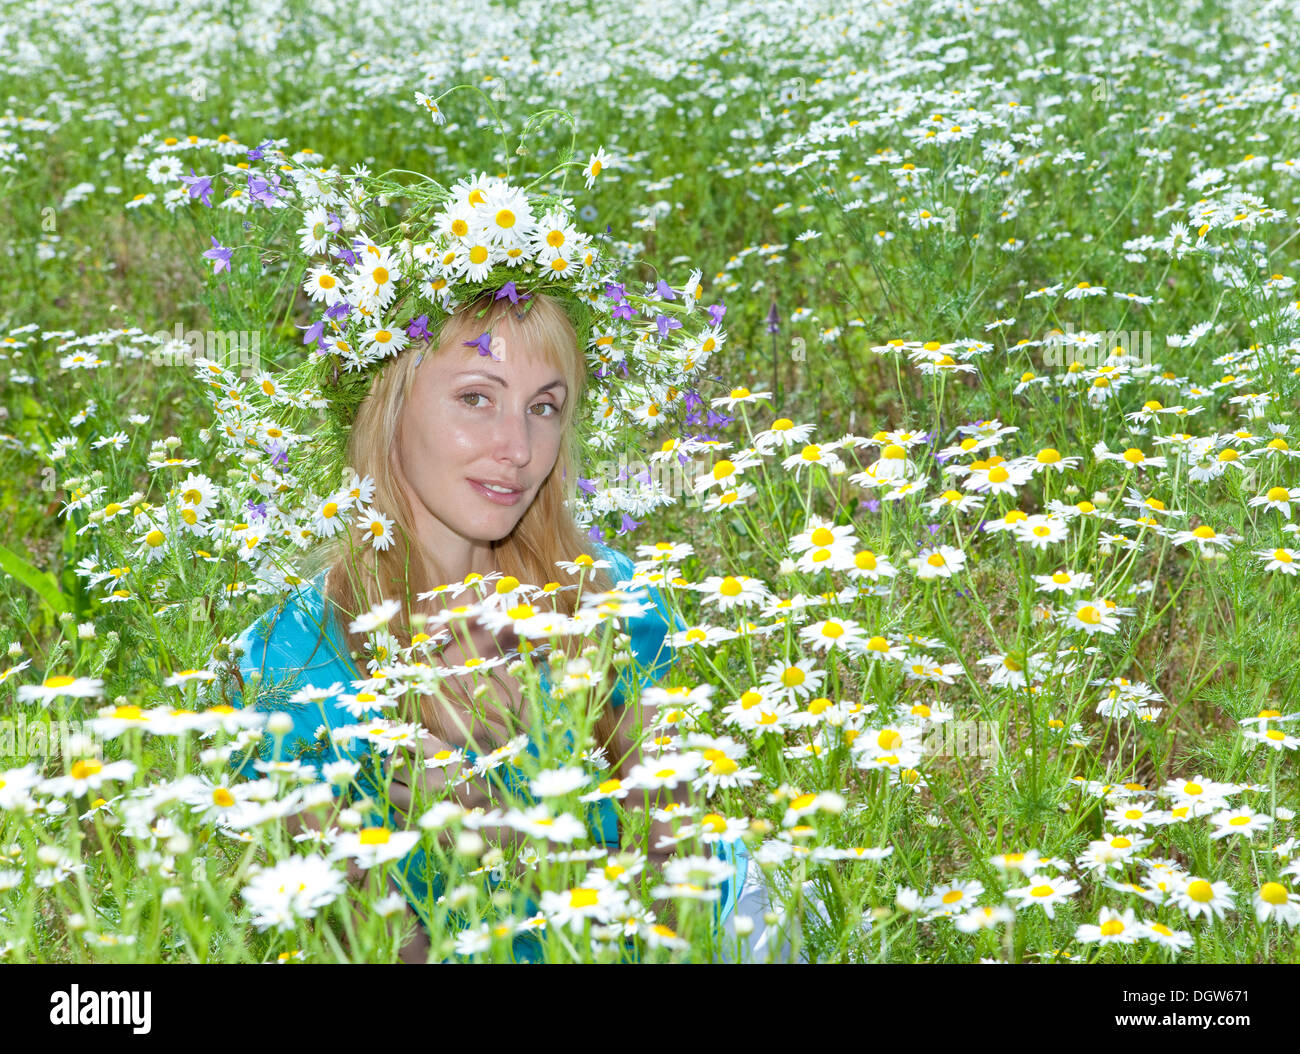 woman in a wreath from wild flowers Stock Photo